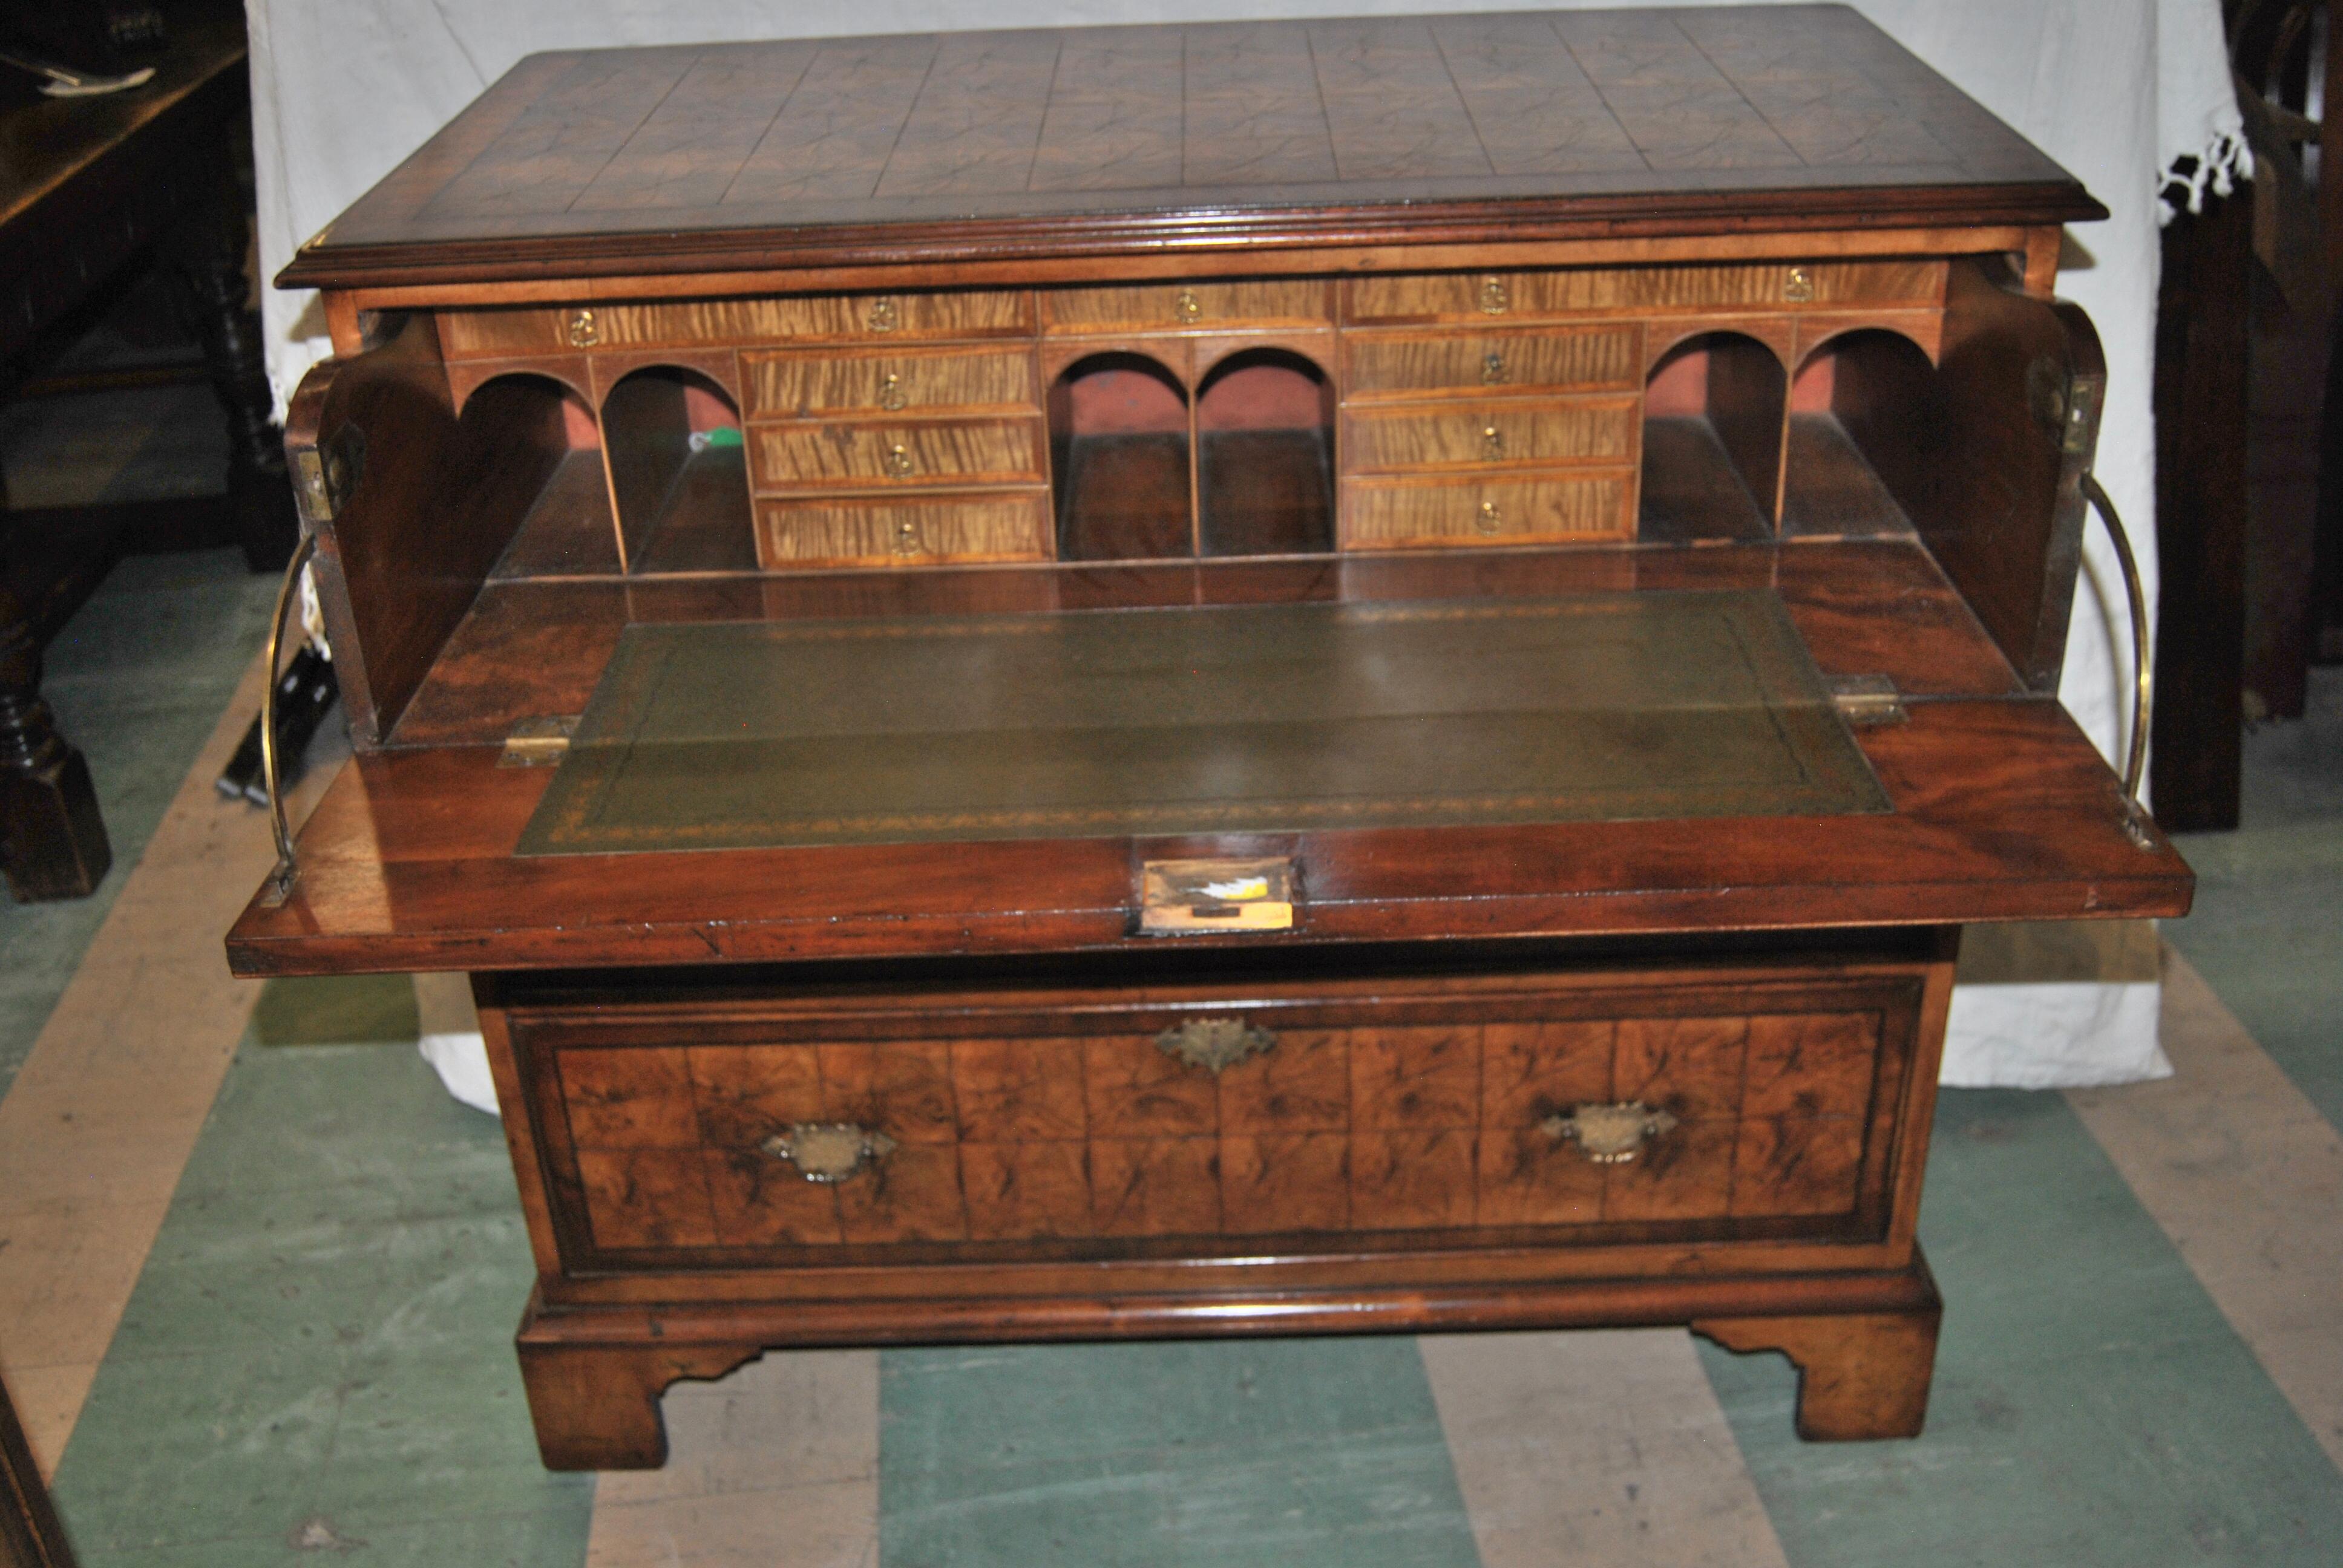 This is a butlers chest or desk made in England, circa 1825. The top has a nicely molded edge and is banded in mahogany followed by a string inlay of ebony with oyster cut walnut to the middle. The top drawer drops down to reveal a desk with 9